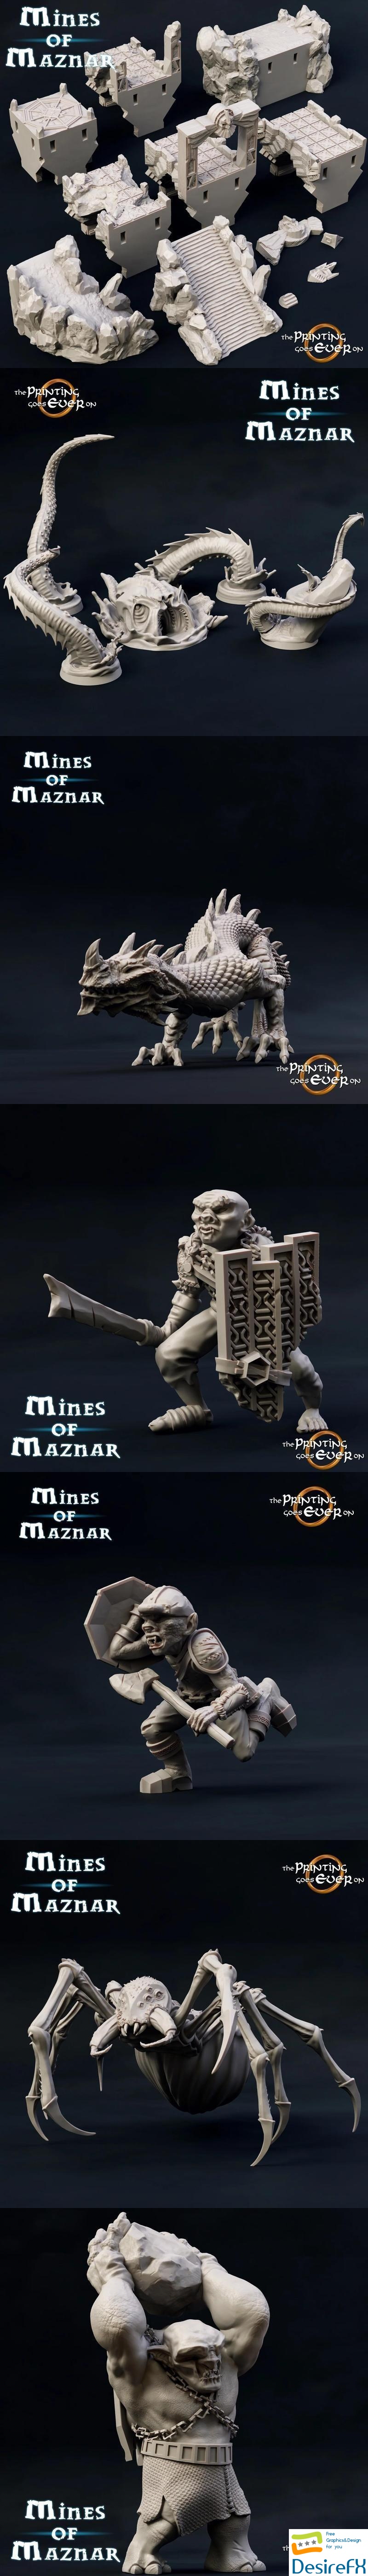 The Printing Goes Ever On - Mines of Maznar 3D Print